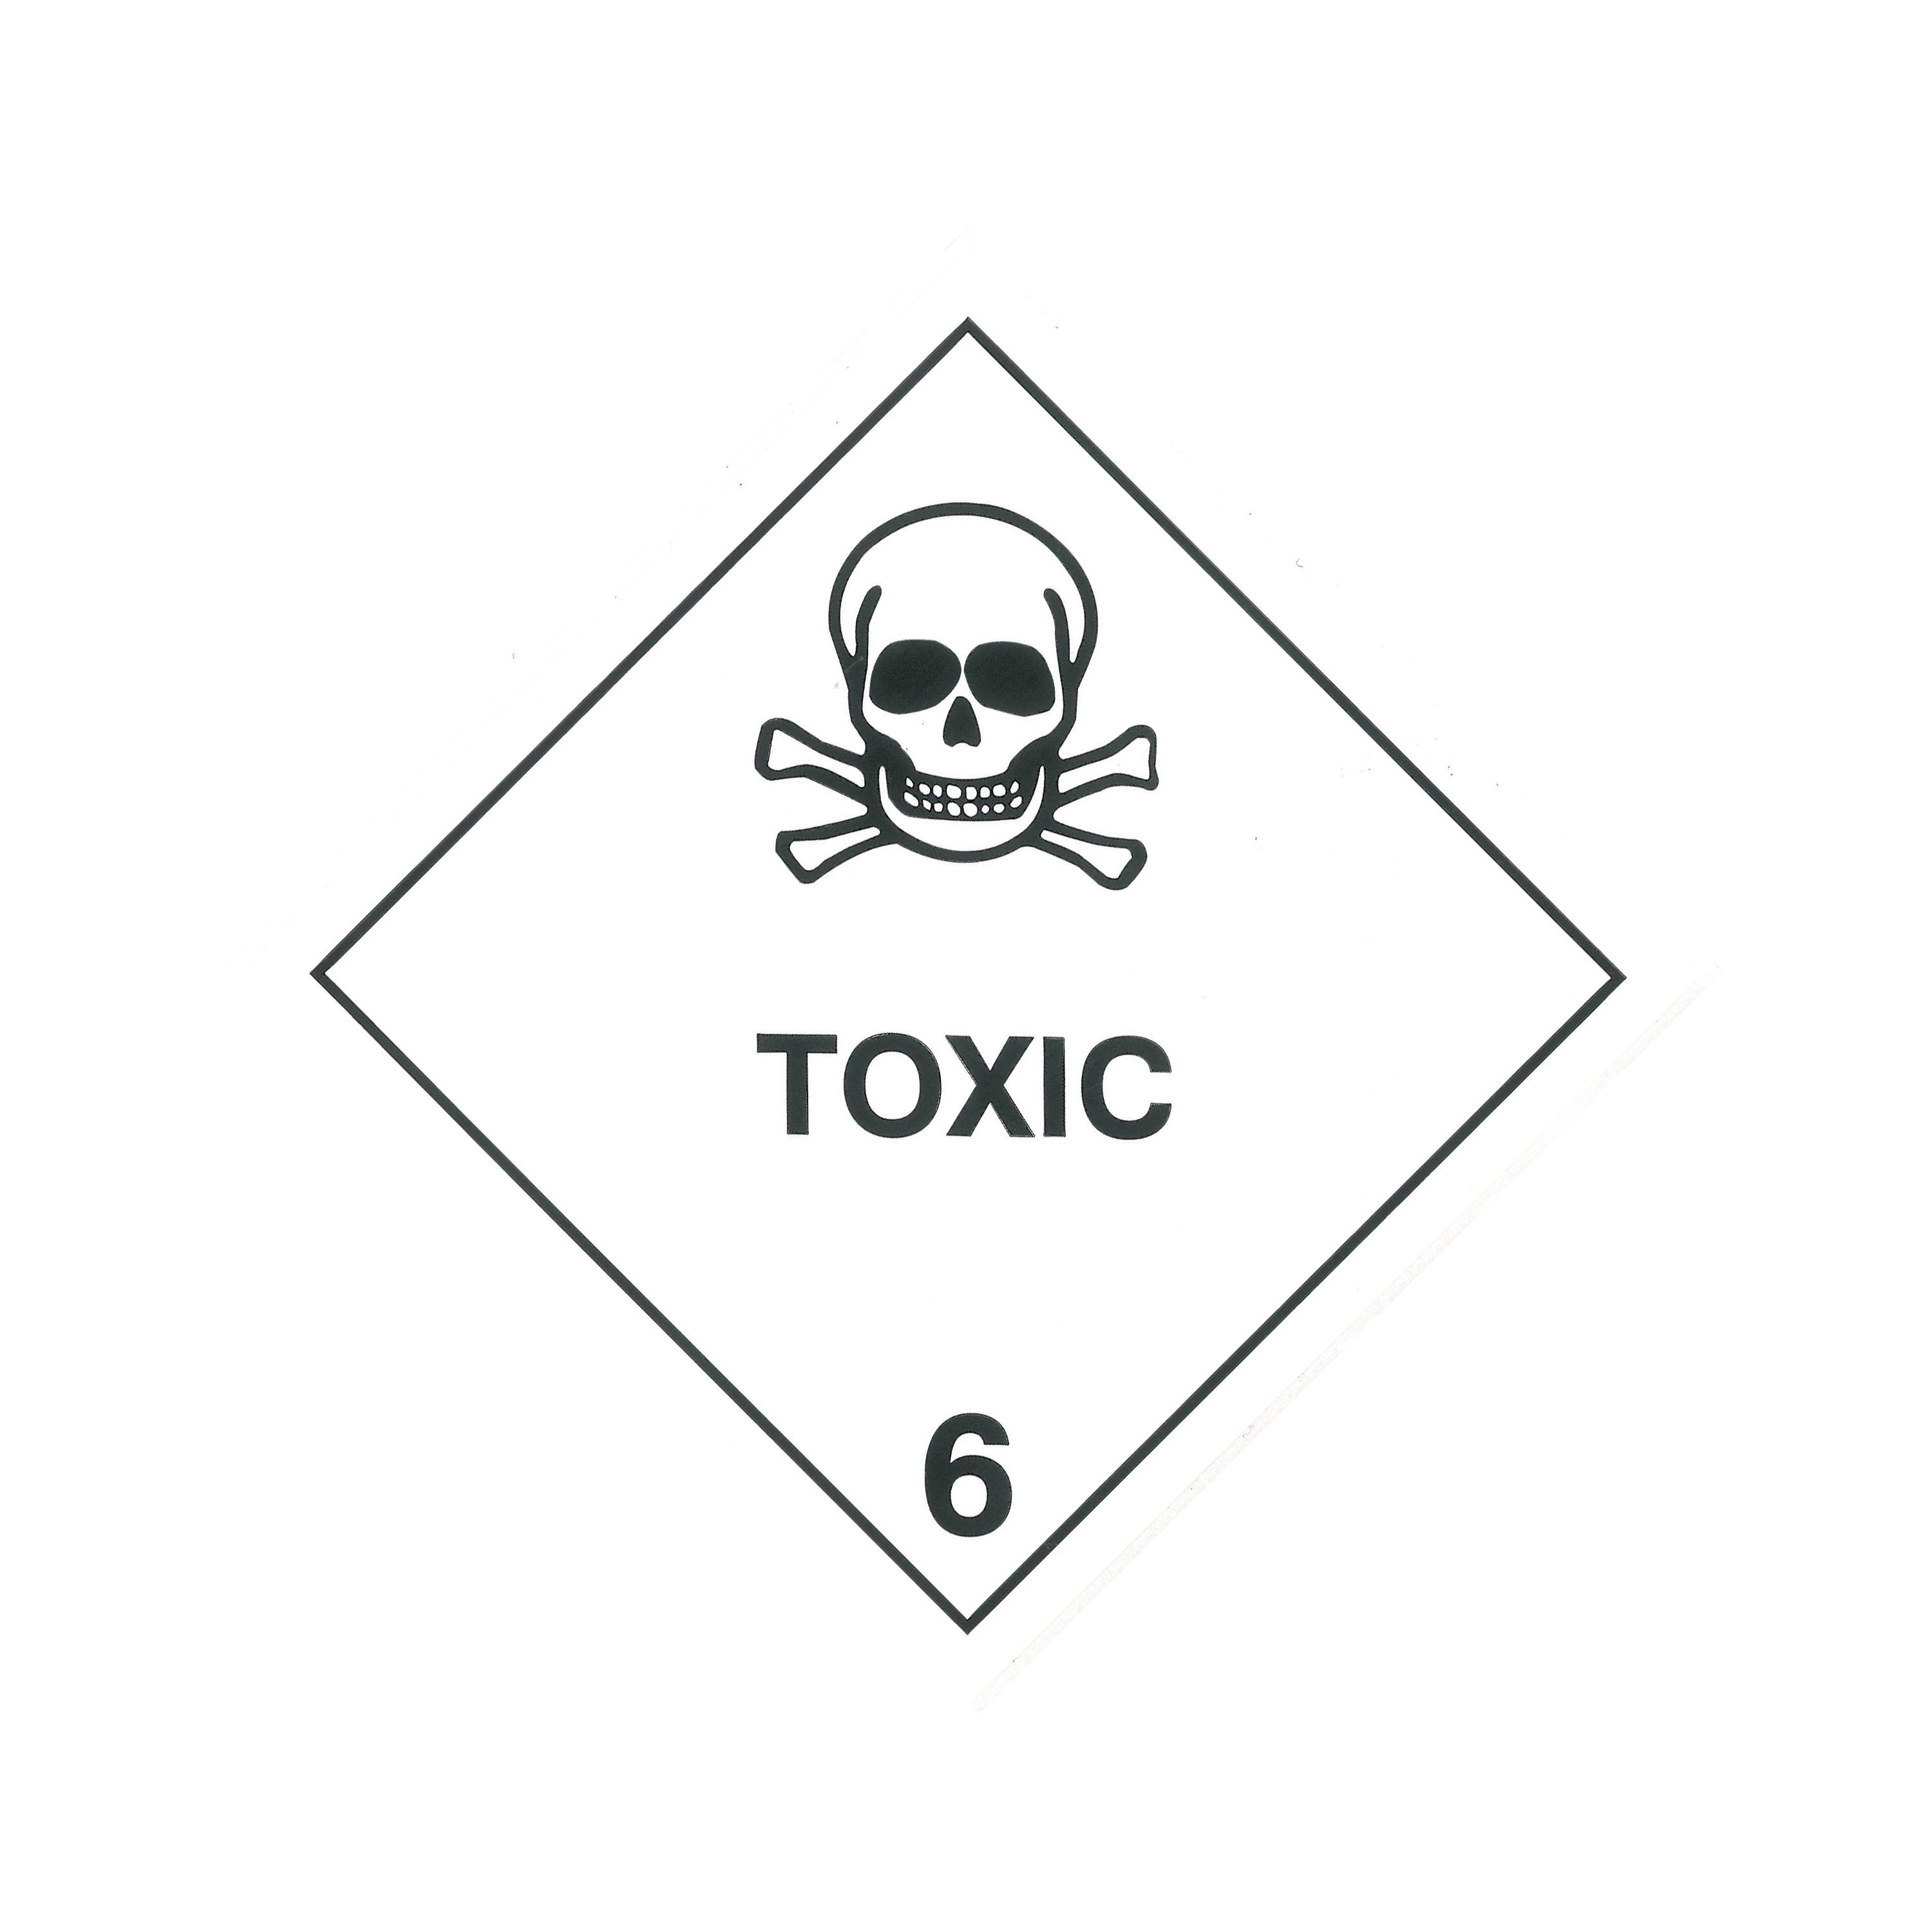 Toxic Substances  Just another  site